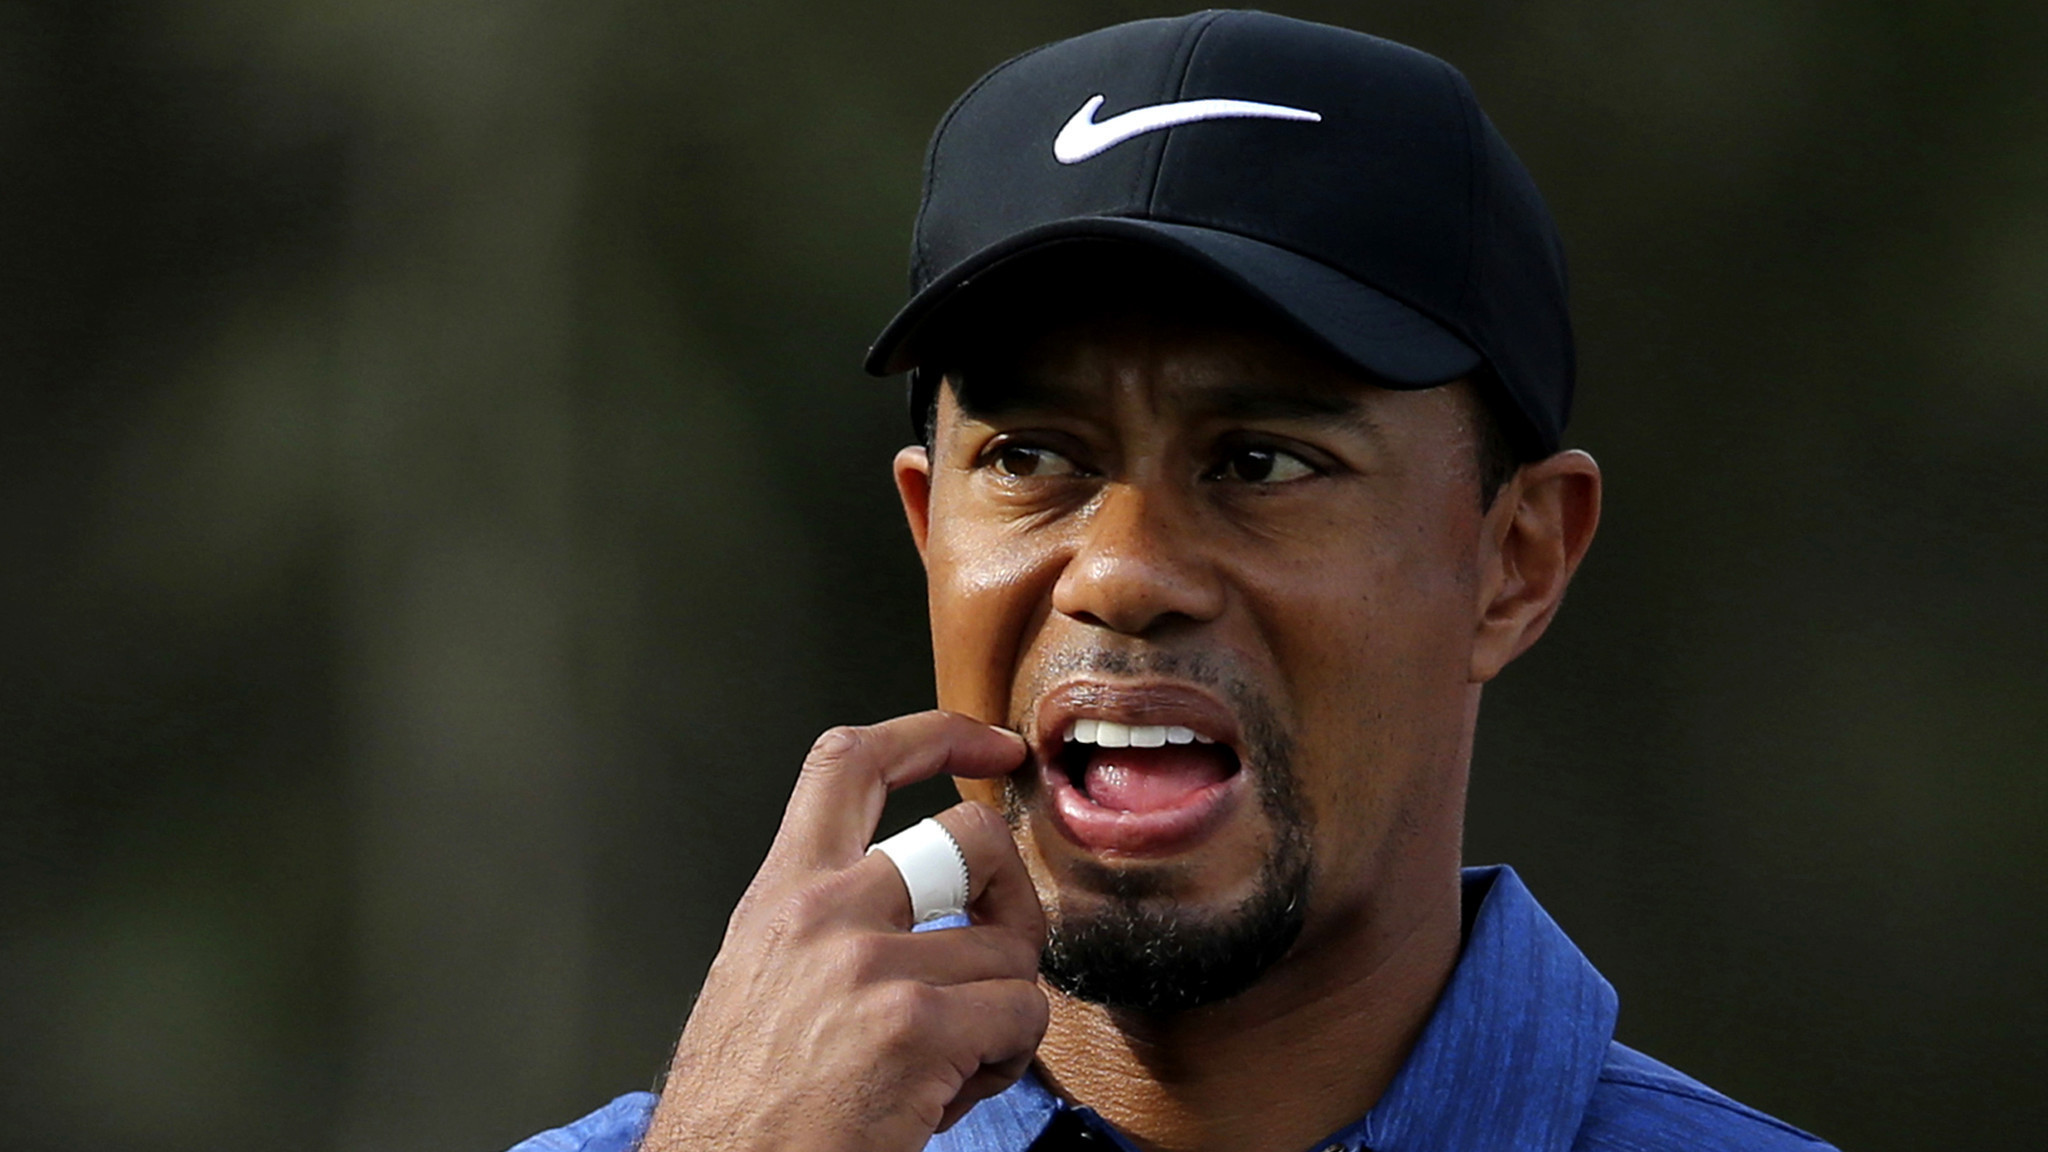 Tiger Woods will not play in the Masters tournament - LA Times